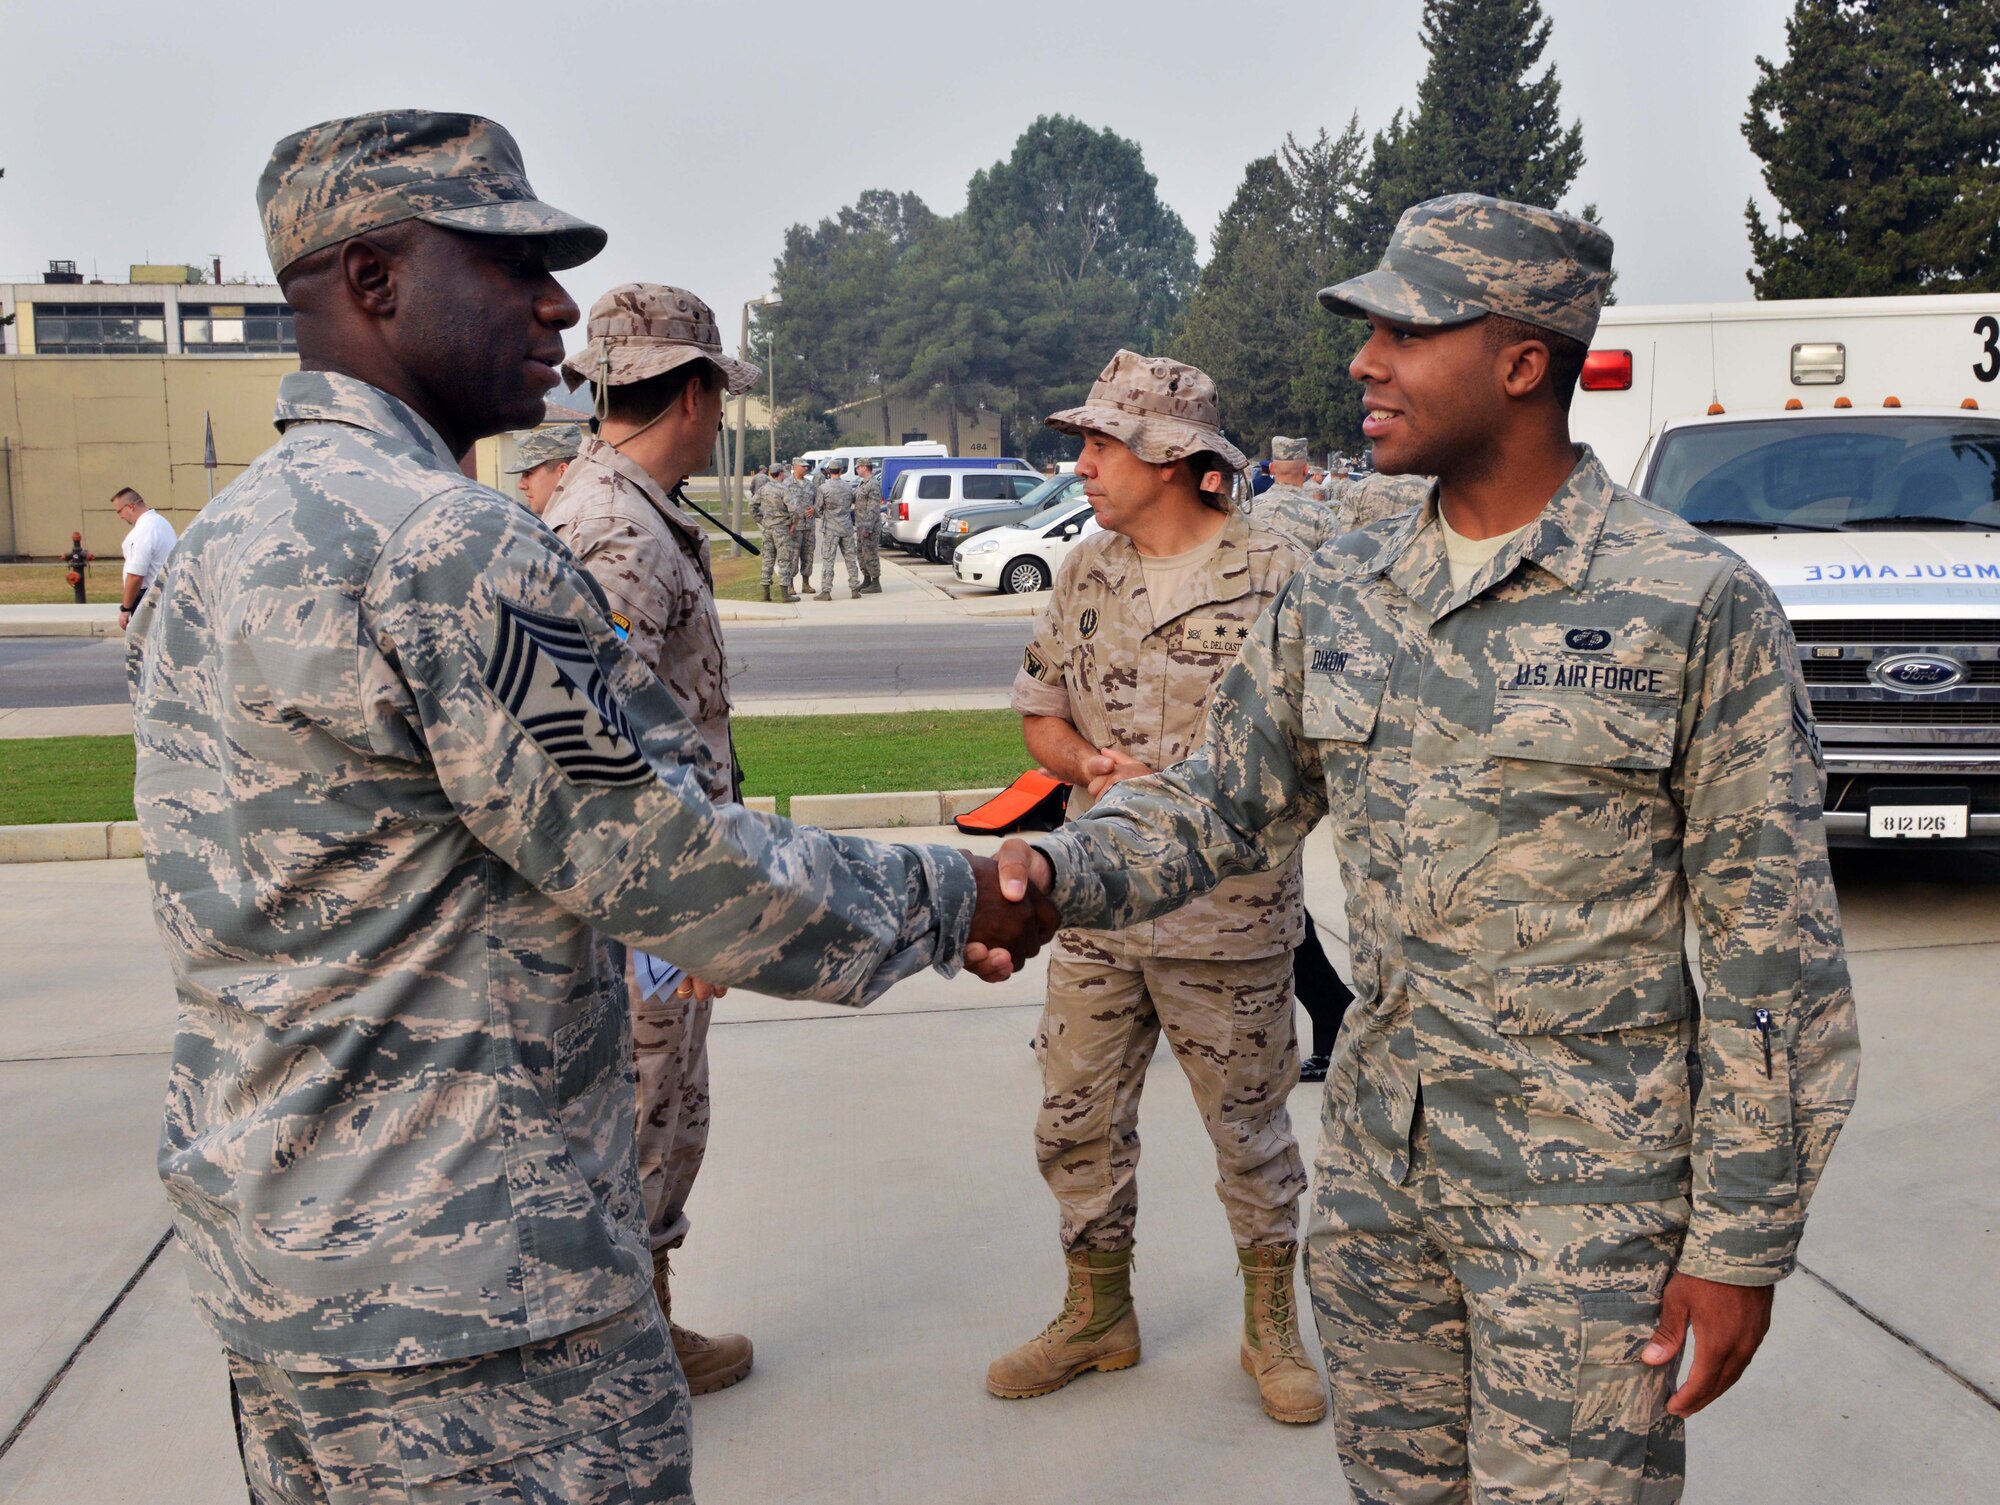 Chief Master Sgt. Vegas Clark, 39th Air Base Wing commander, greets Airman 1st Class Justin Dixon, 39th Comptroller Squadron customer service apprentice, upon meeting him for his chief shadow day Sept. 11, 2015, at Incirlik Air Base, Turkey. Bi-weekly, a member of Team Incirlik is chosen to follow Clark and learn what it’s like to be a command chief. (U.S. Air Force photo by Senior Airman Michael Battles/Released)